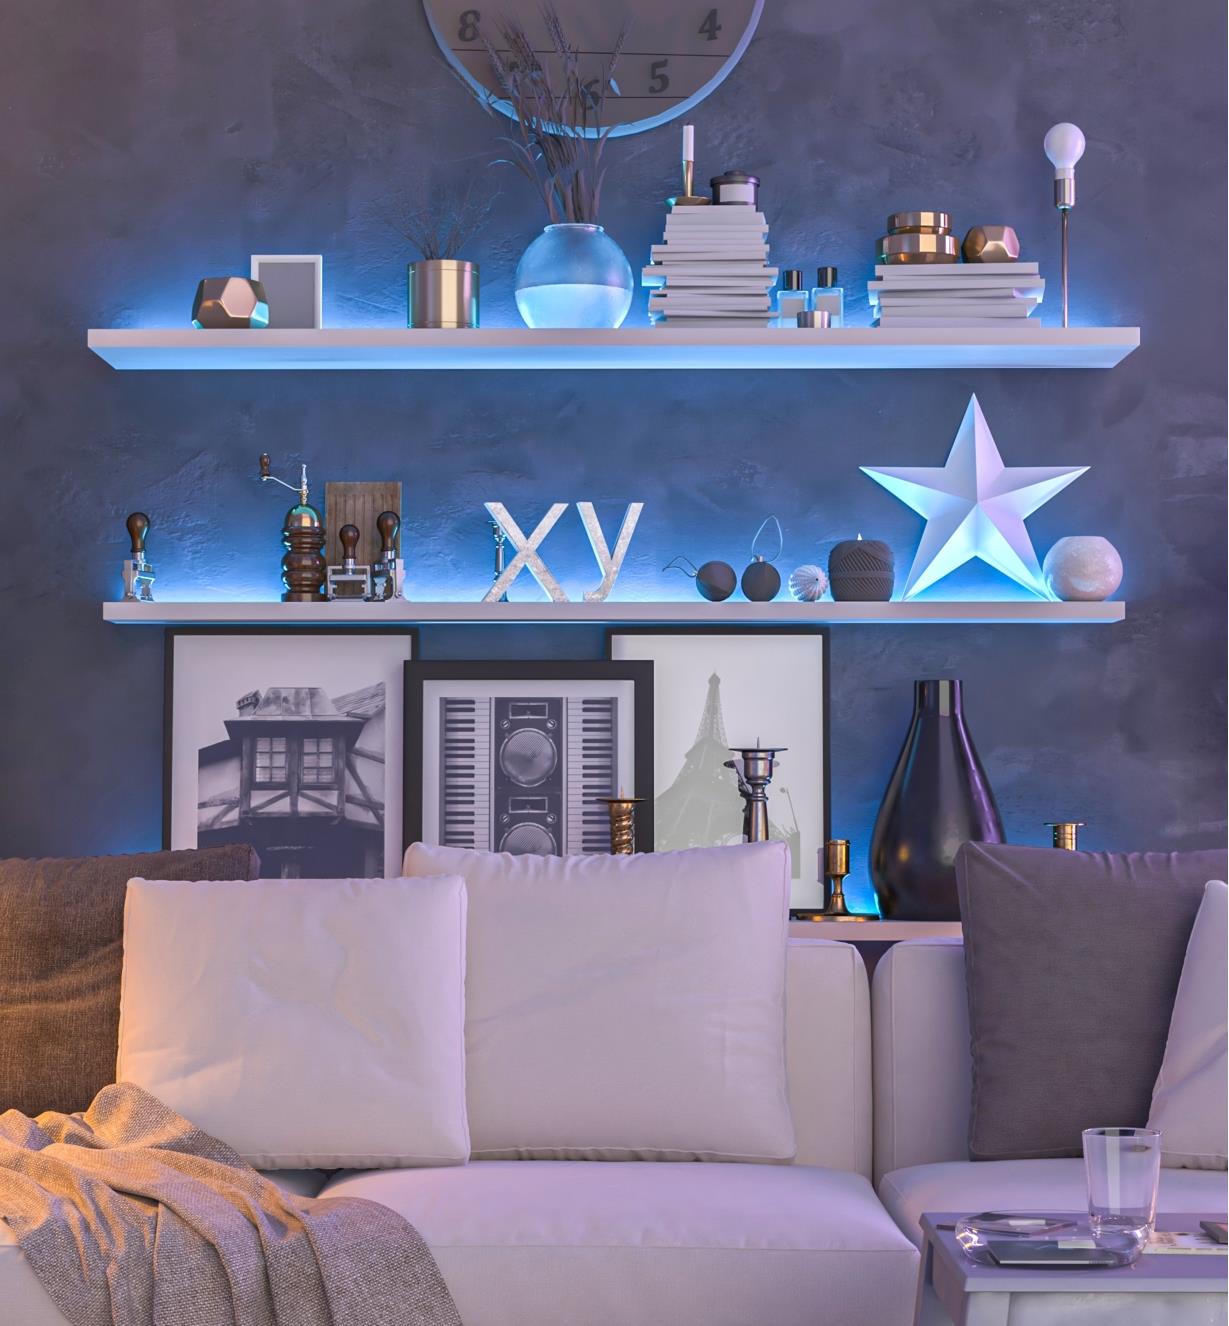 A sofa with a set of shelves above it, illuminated with blue light